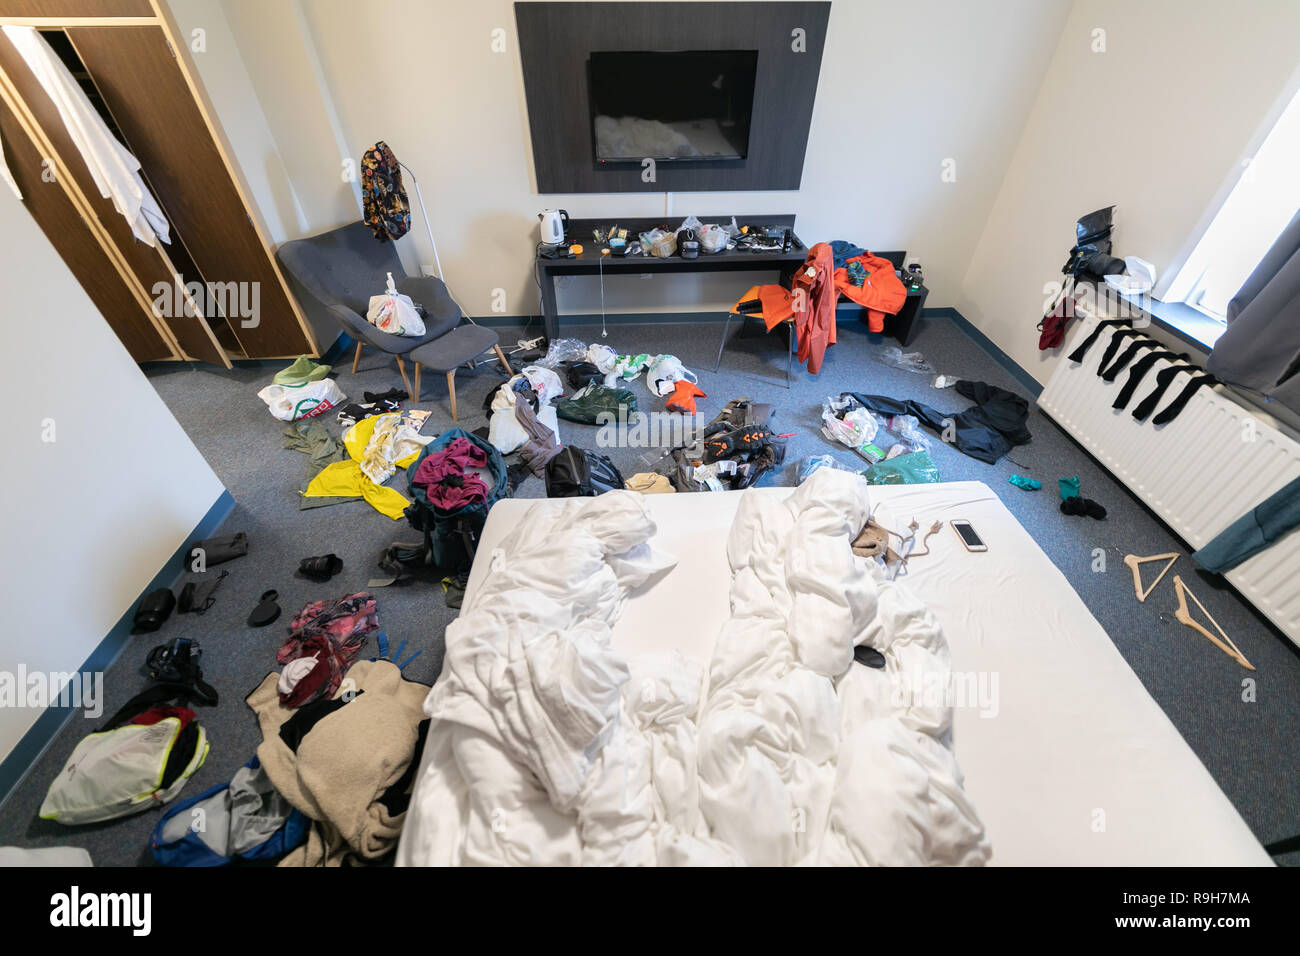 Super messy hotel room backpacking backpackers Stock Photo - Alamy